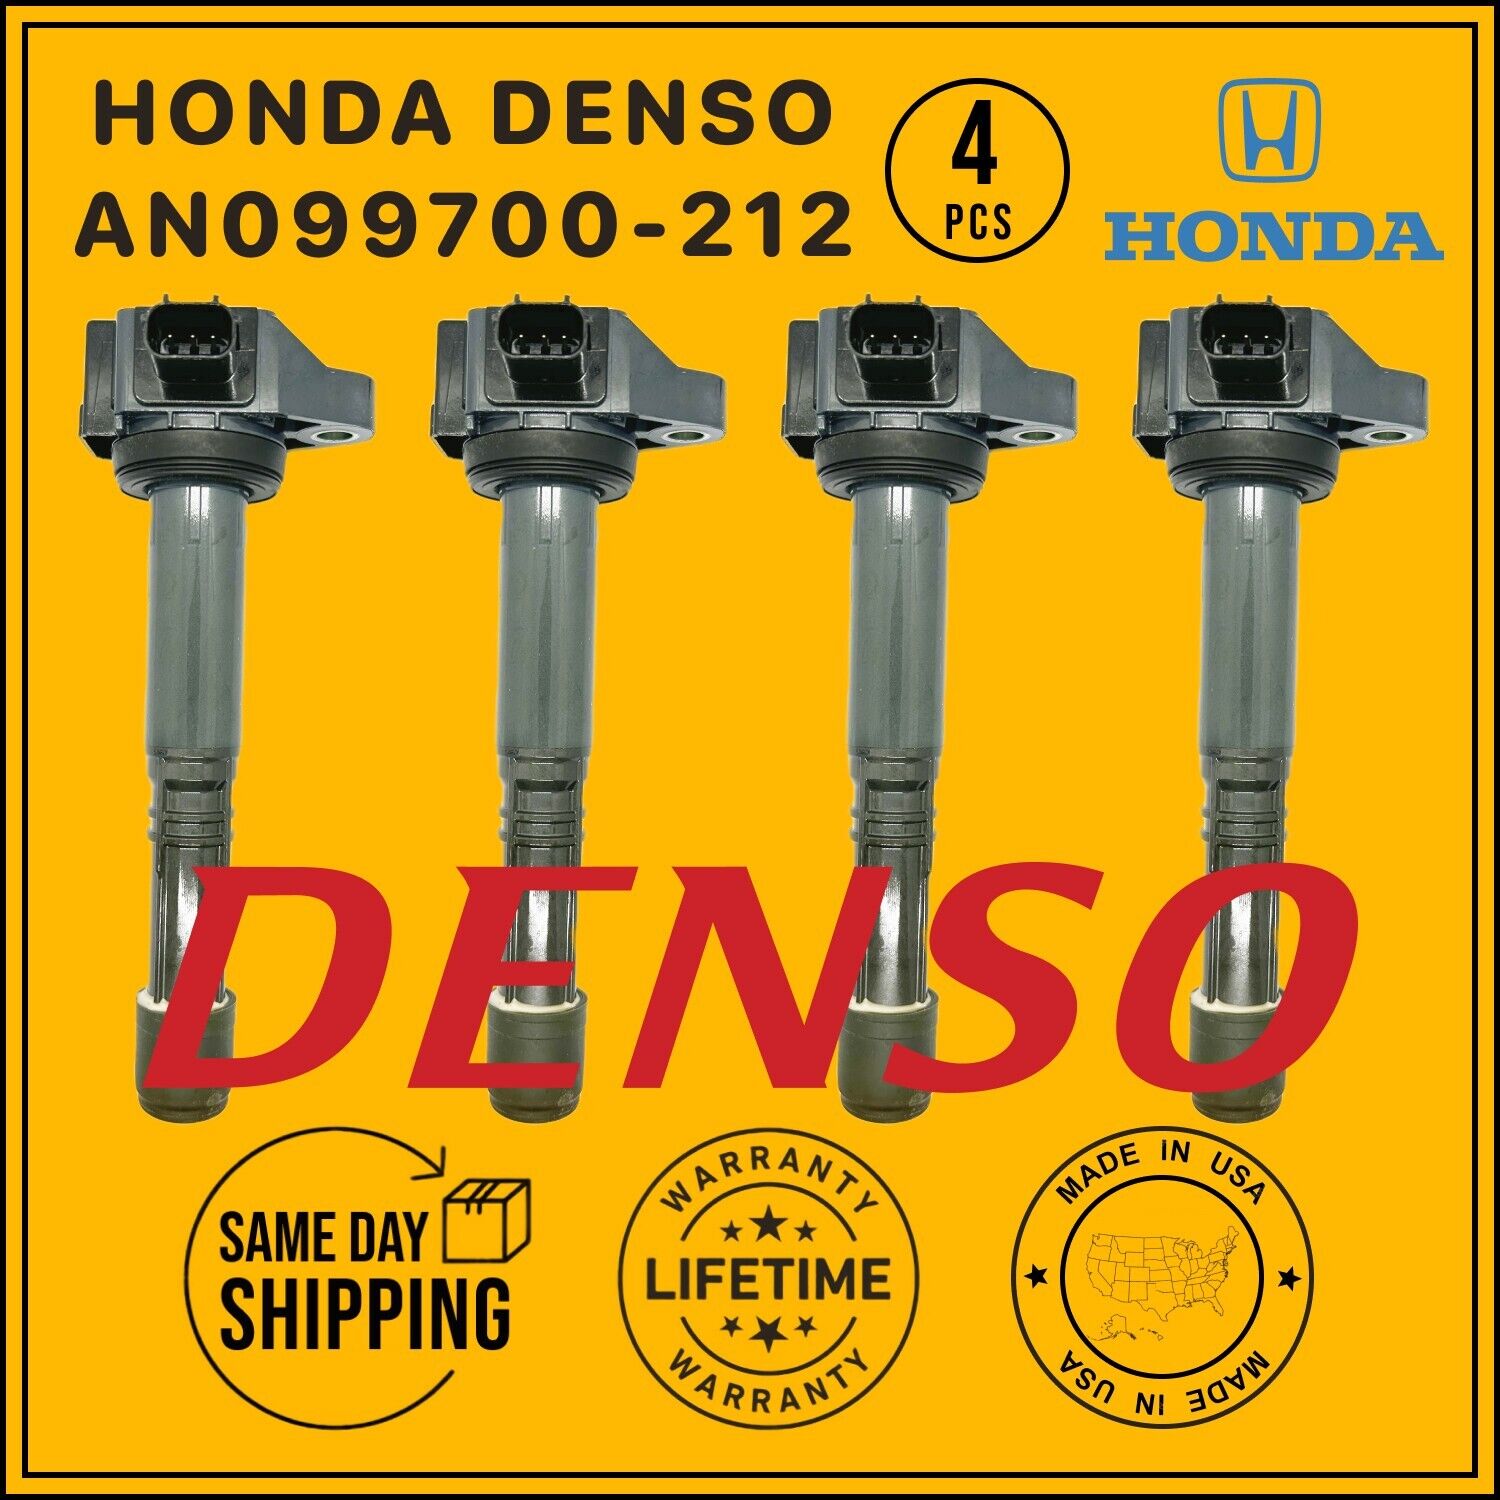 AN099700-212 OEM Denso x4 Ignition Coil For 2013-2021 Honda Accord CR-V, ILX TLX